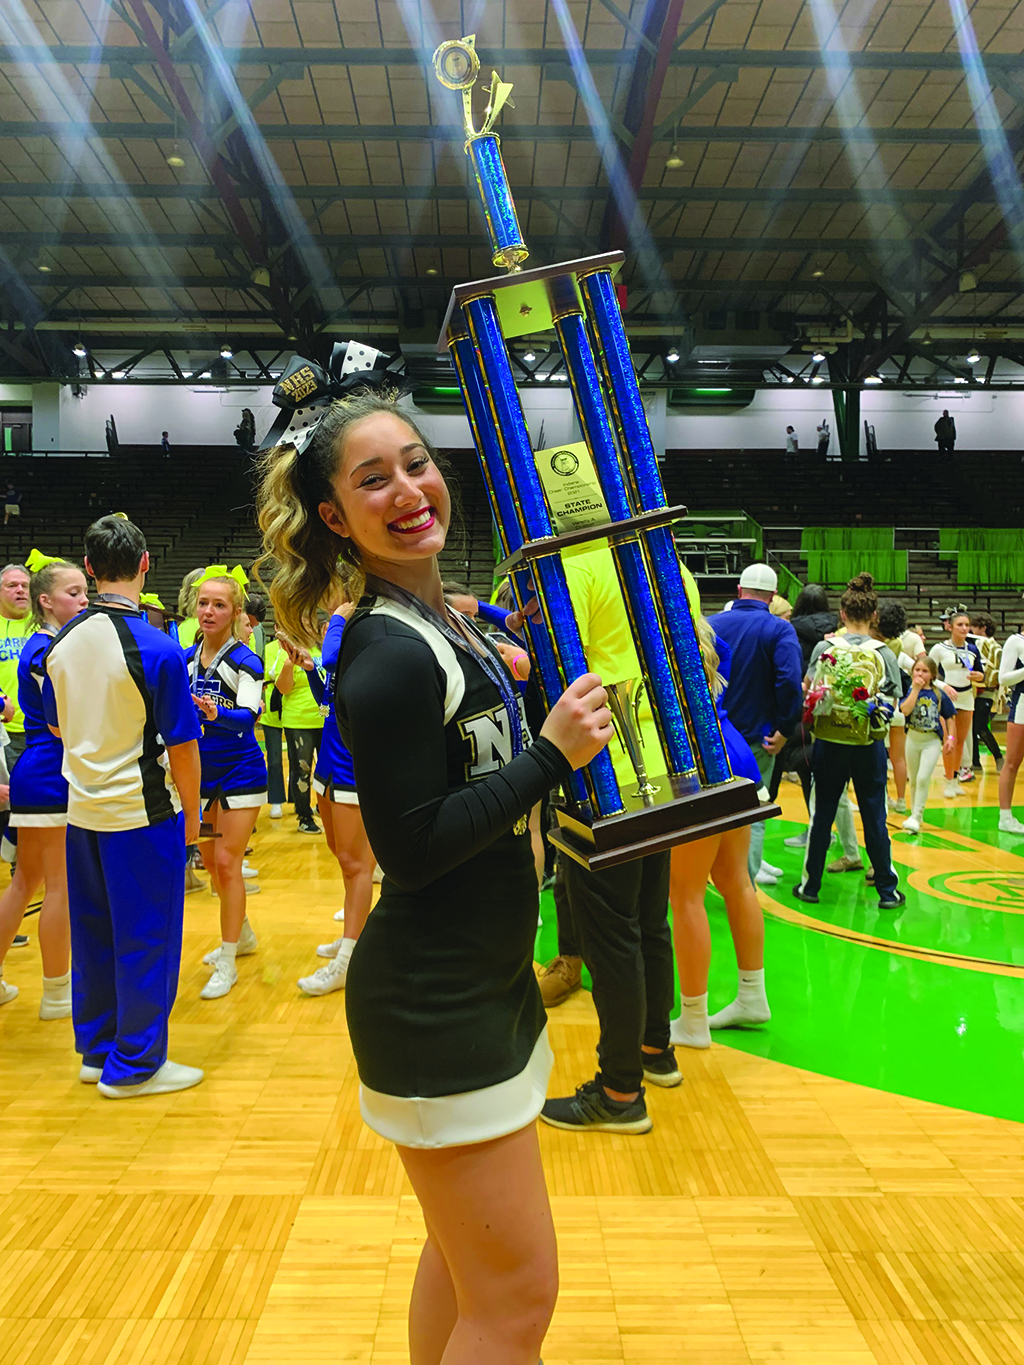 Bring it on: NHS cheerleader Lyza Saunders shares her motivations behind the teams’ state win